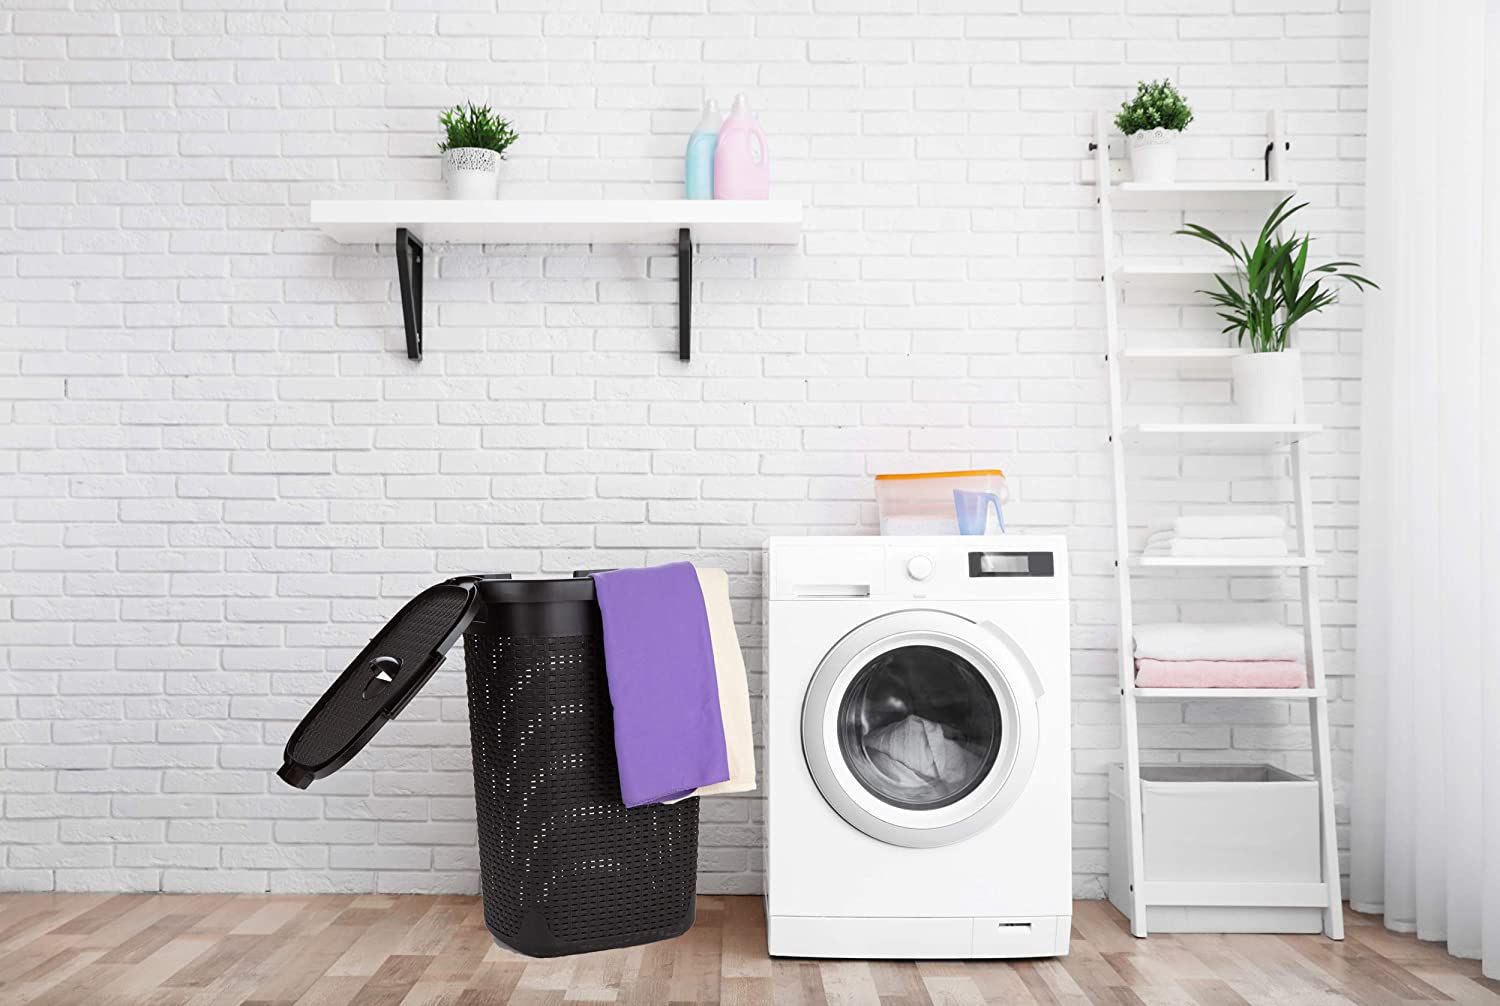 Kids Laundry Hamper Ideas : Find your perfect one at your local at home ...